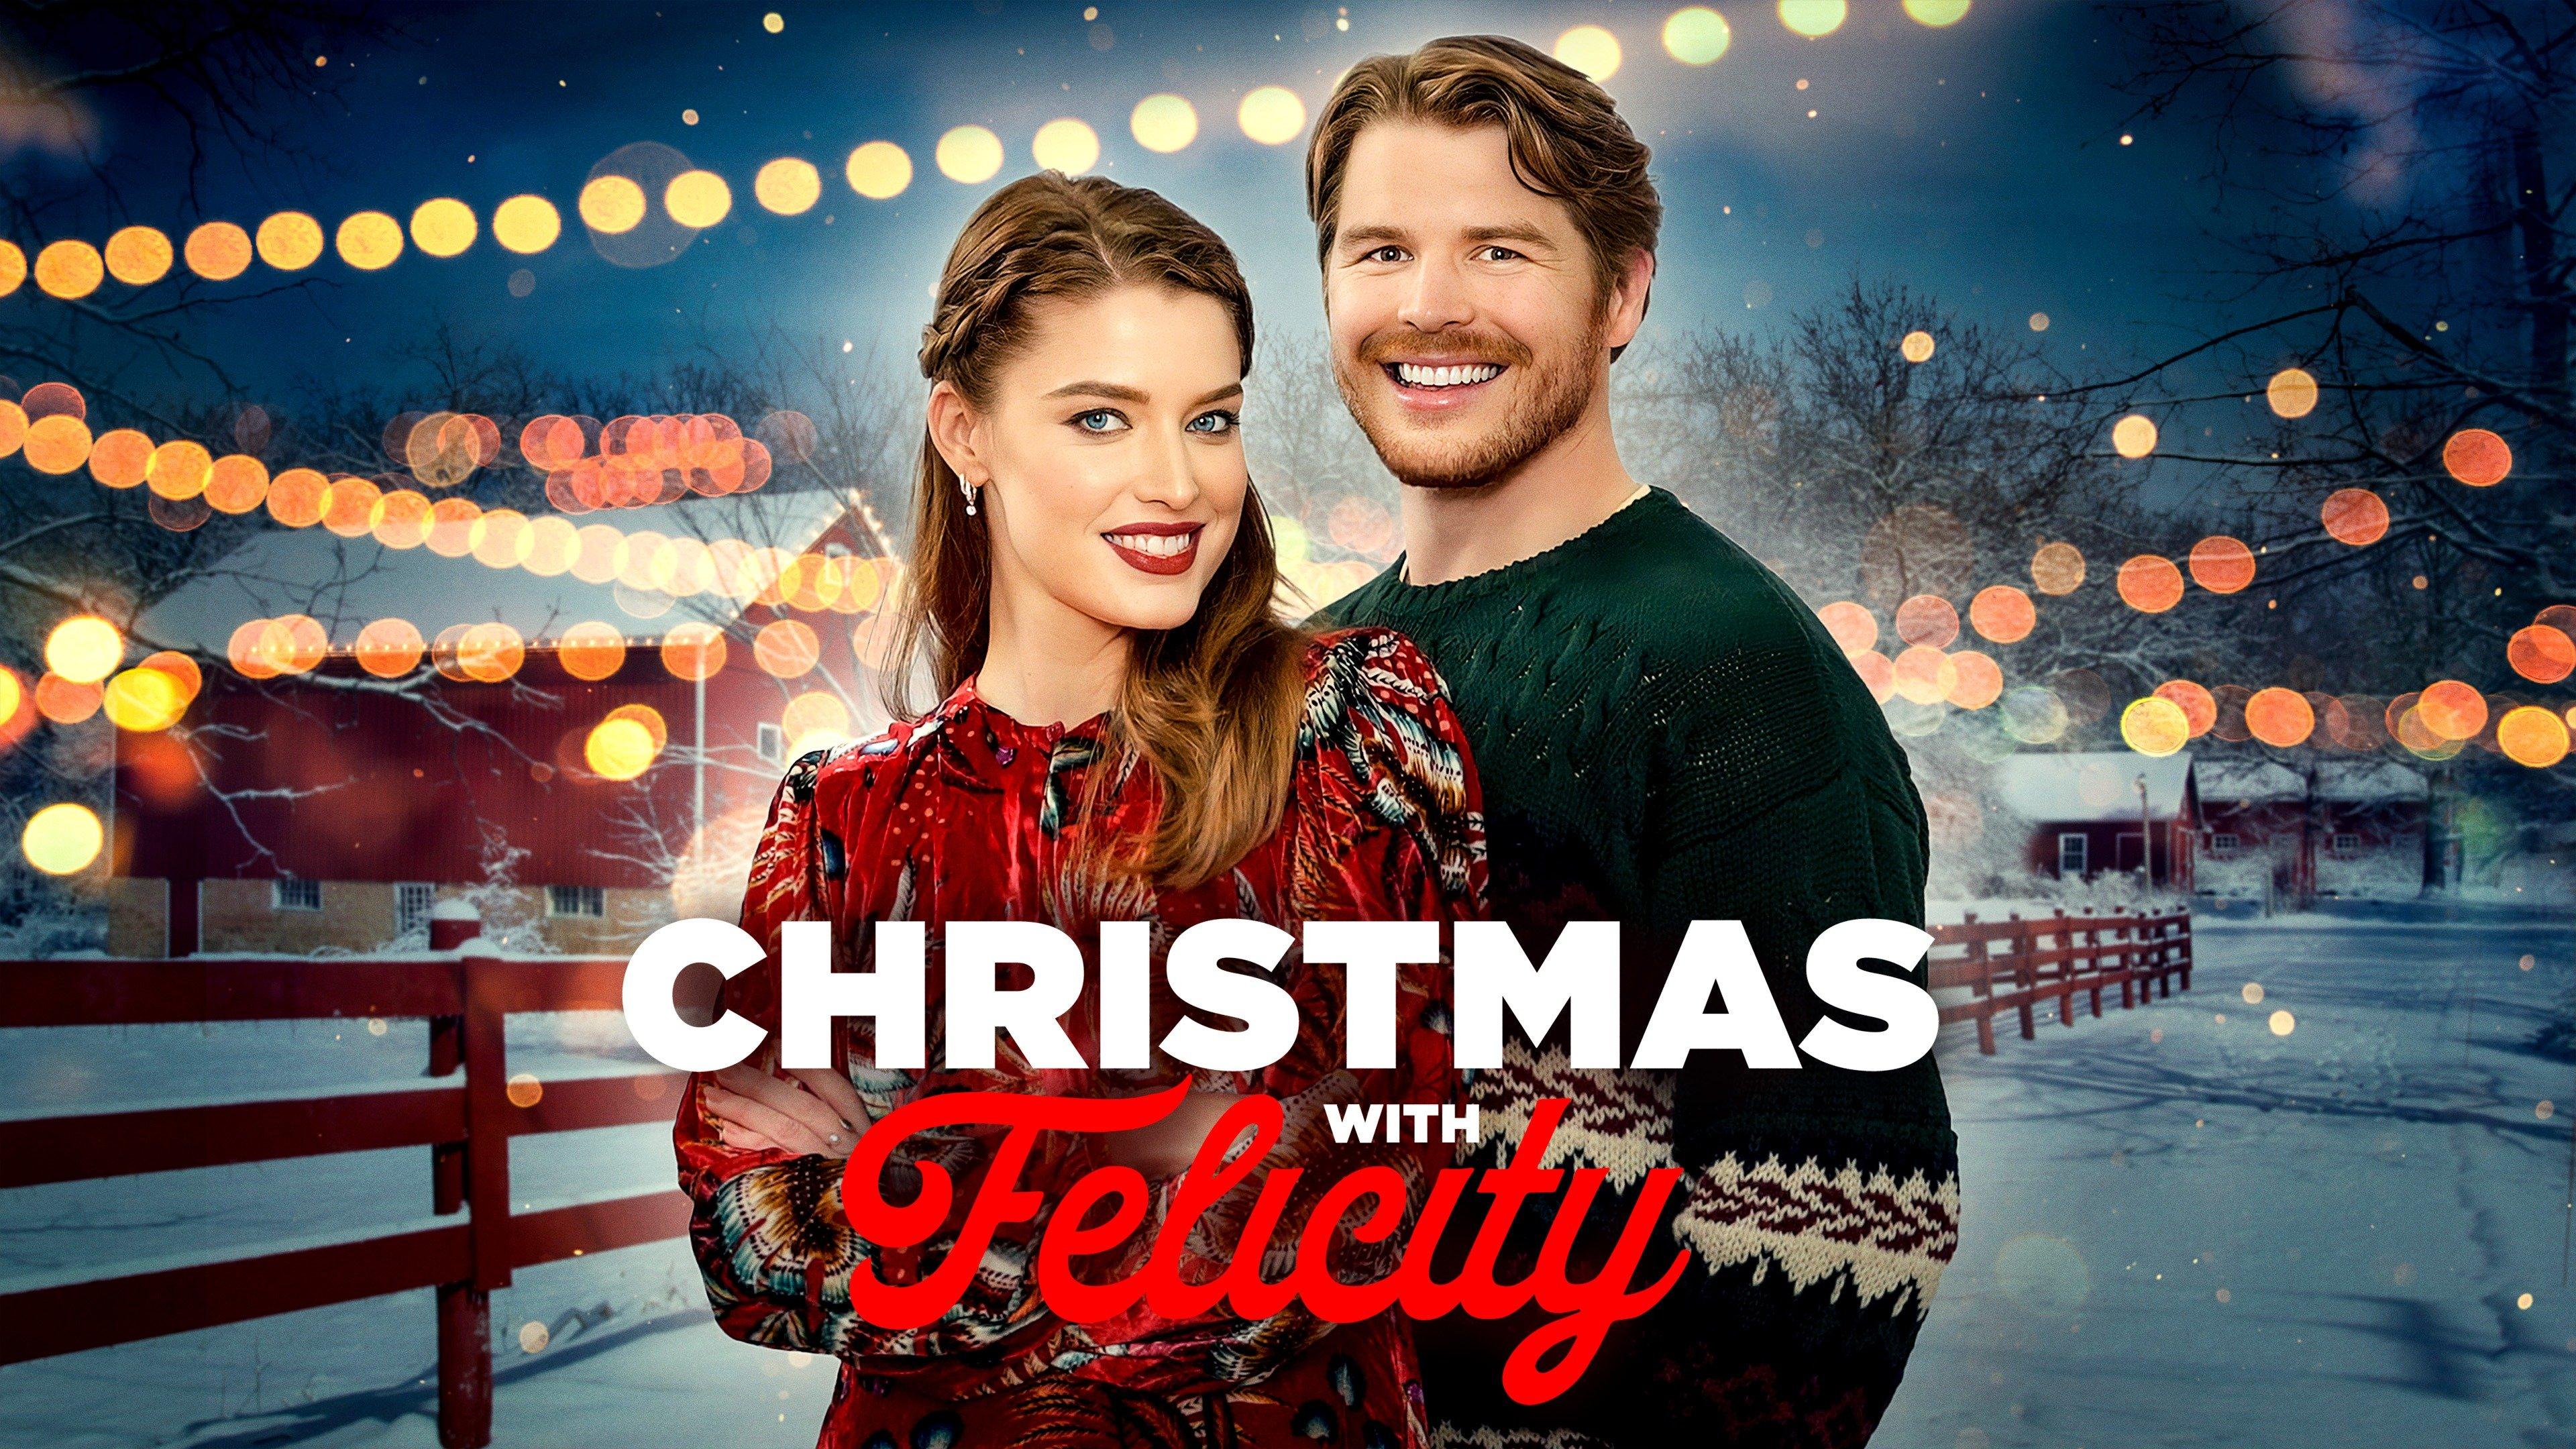 Watch Christmas With Felicity Streaming Online on Philo (Free Trial)